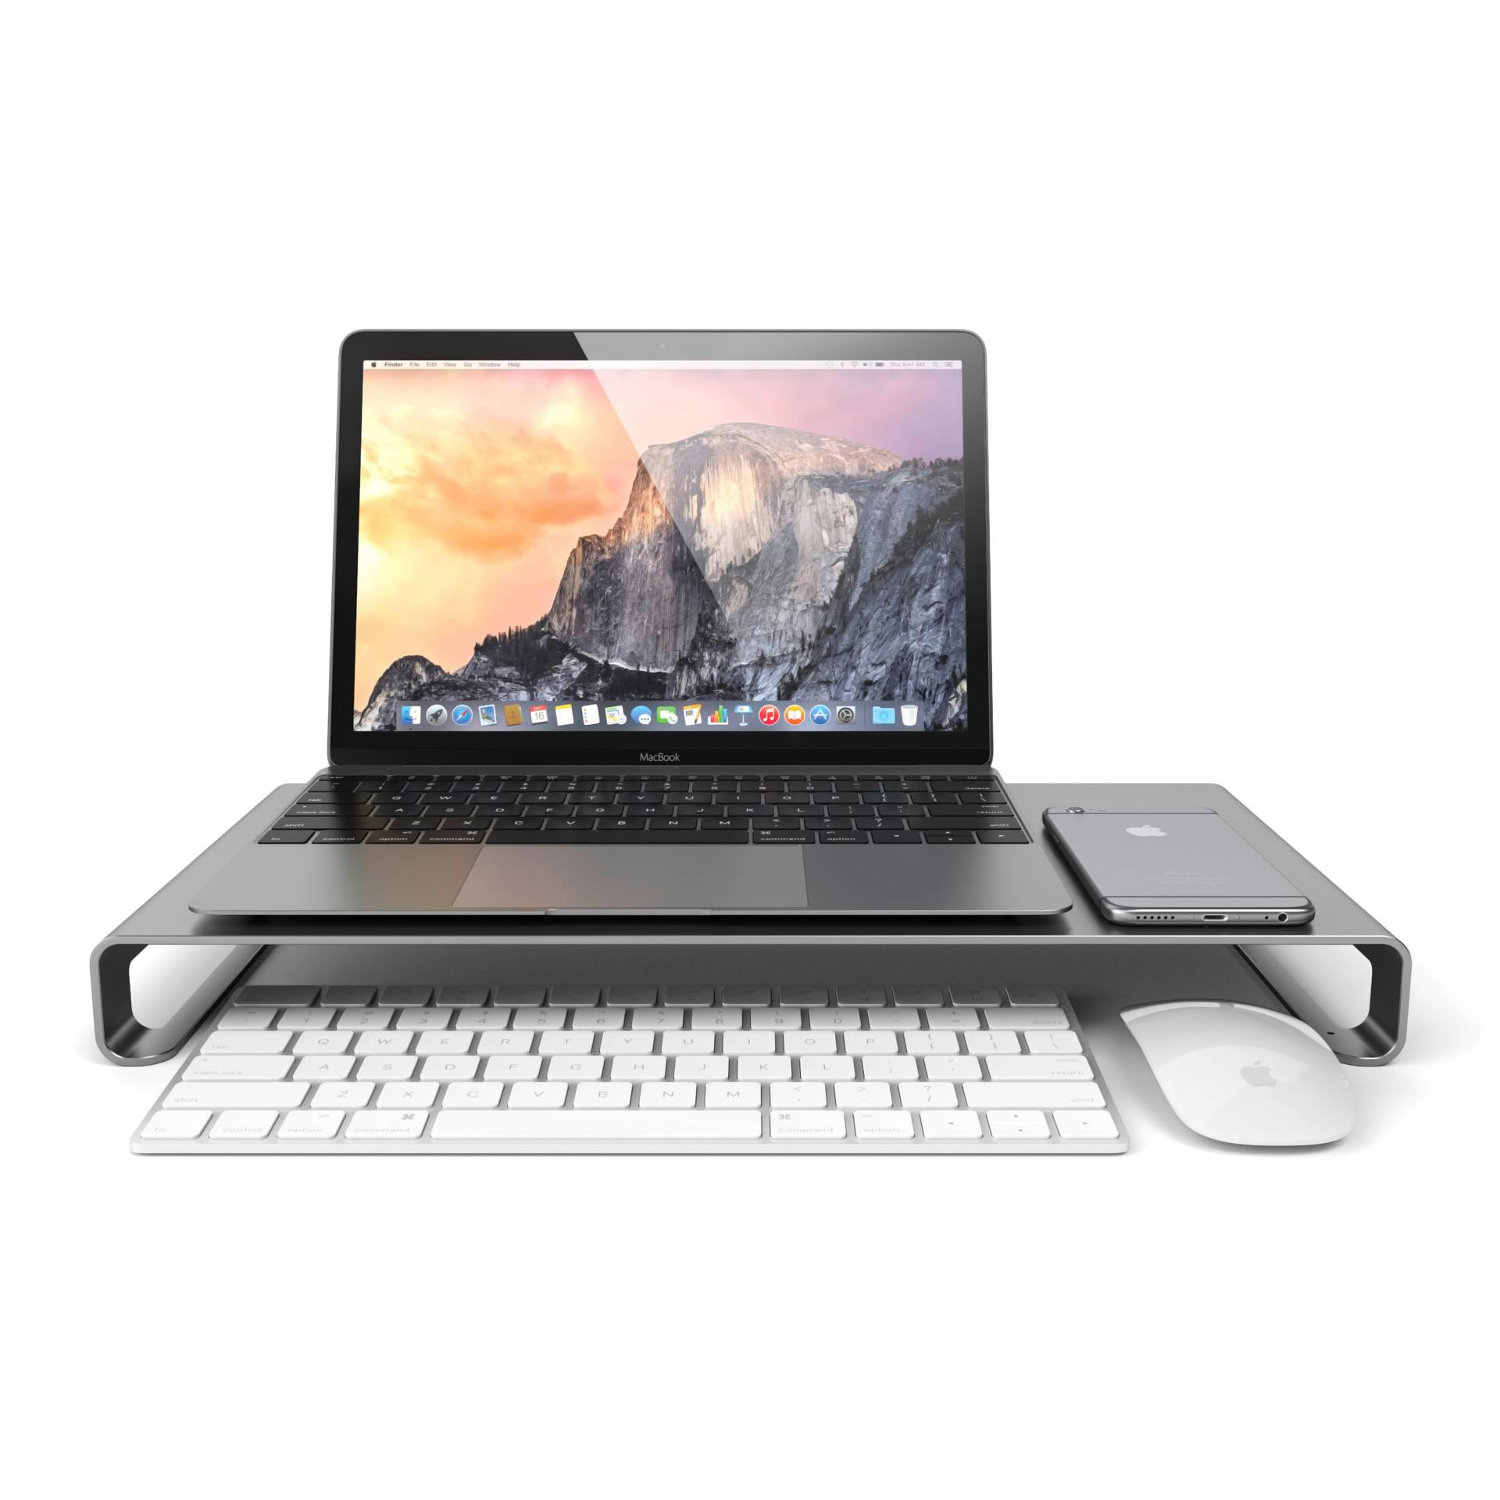 Satechi Aluminium monitor stand shown with MacBook and iPhone